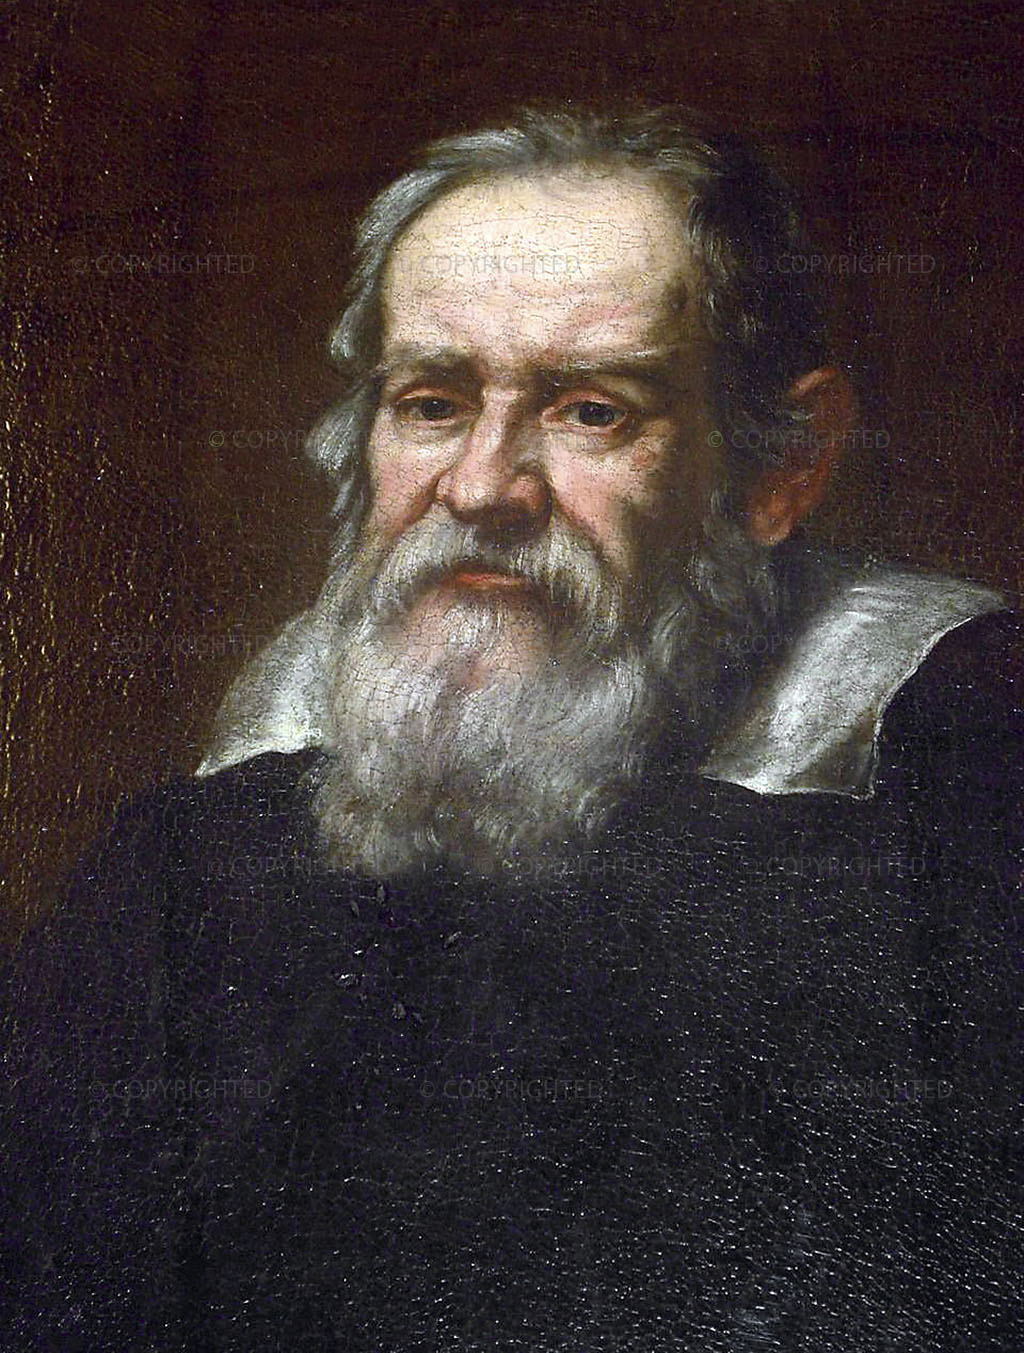 1640-1650, Oil on canvas, cm 60 x 50, New York, American Natural History